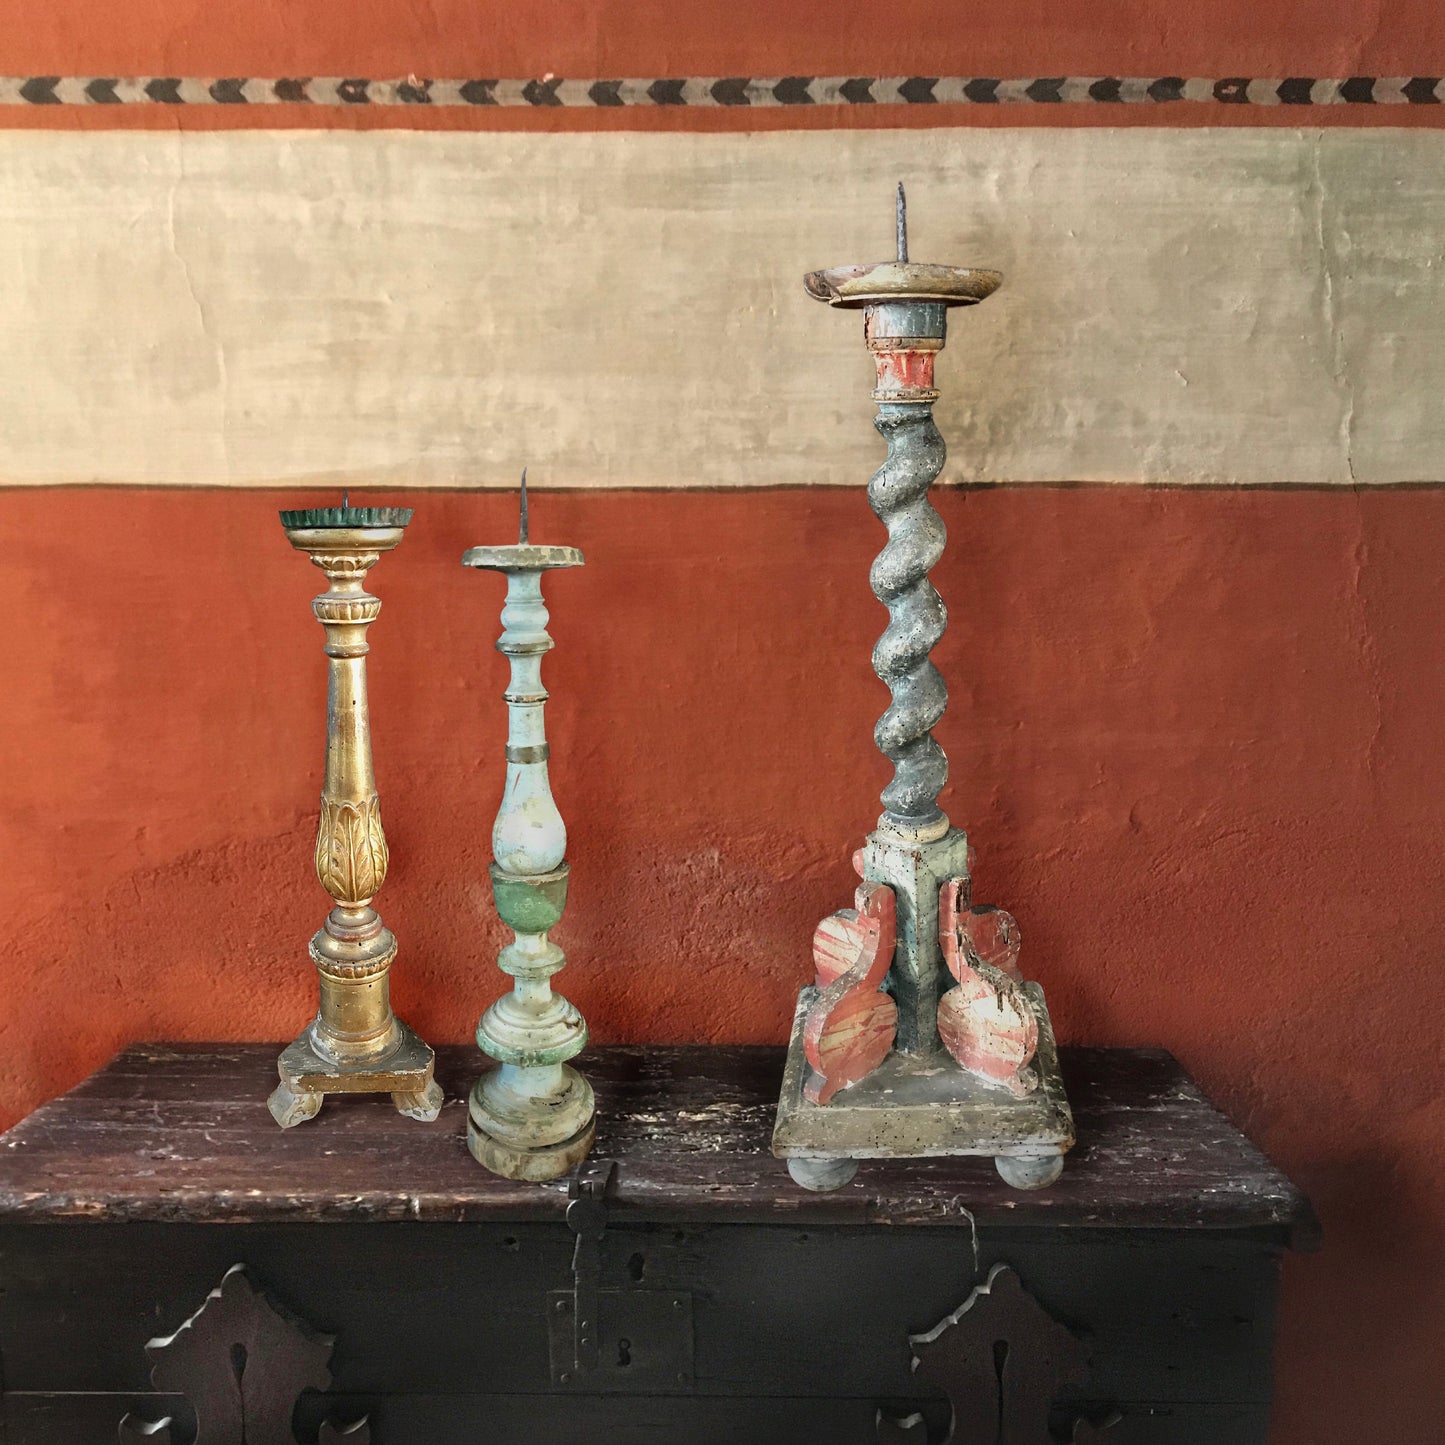 Large Italian Polychrome Candle-stand c.1750